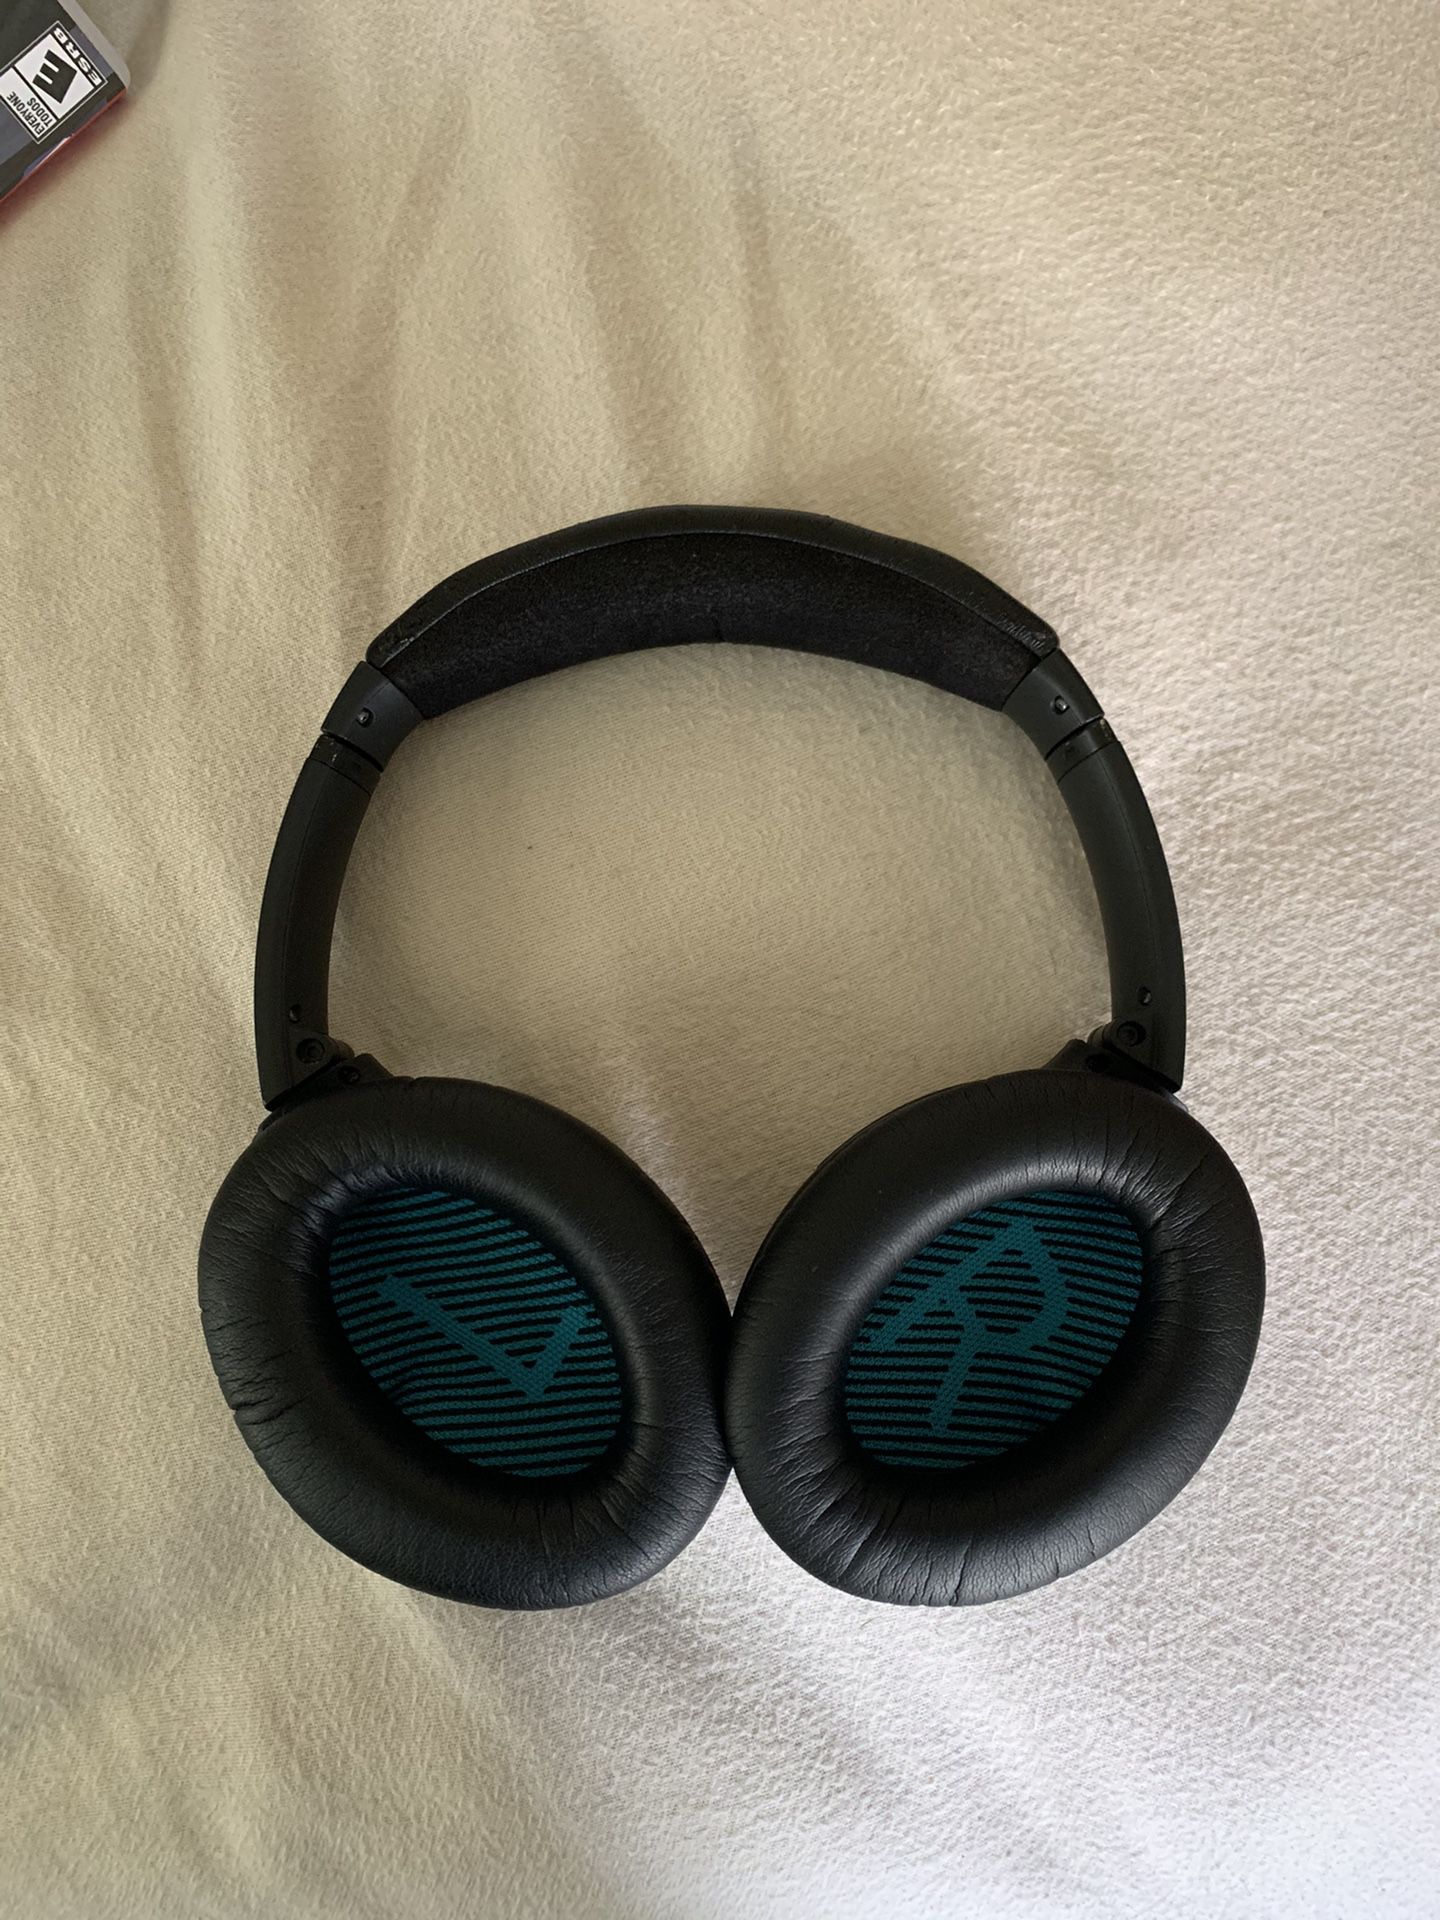 Bose Noise Cancelling Over Ear headphones